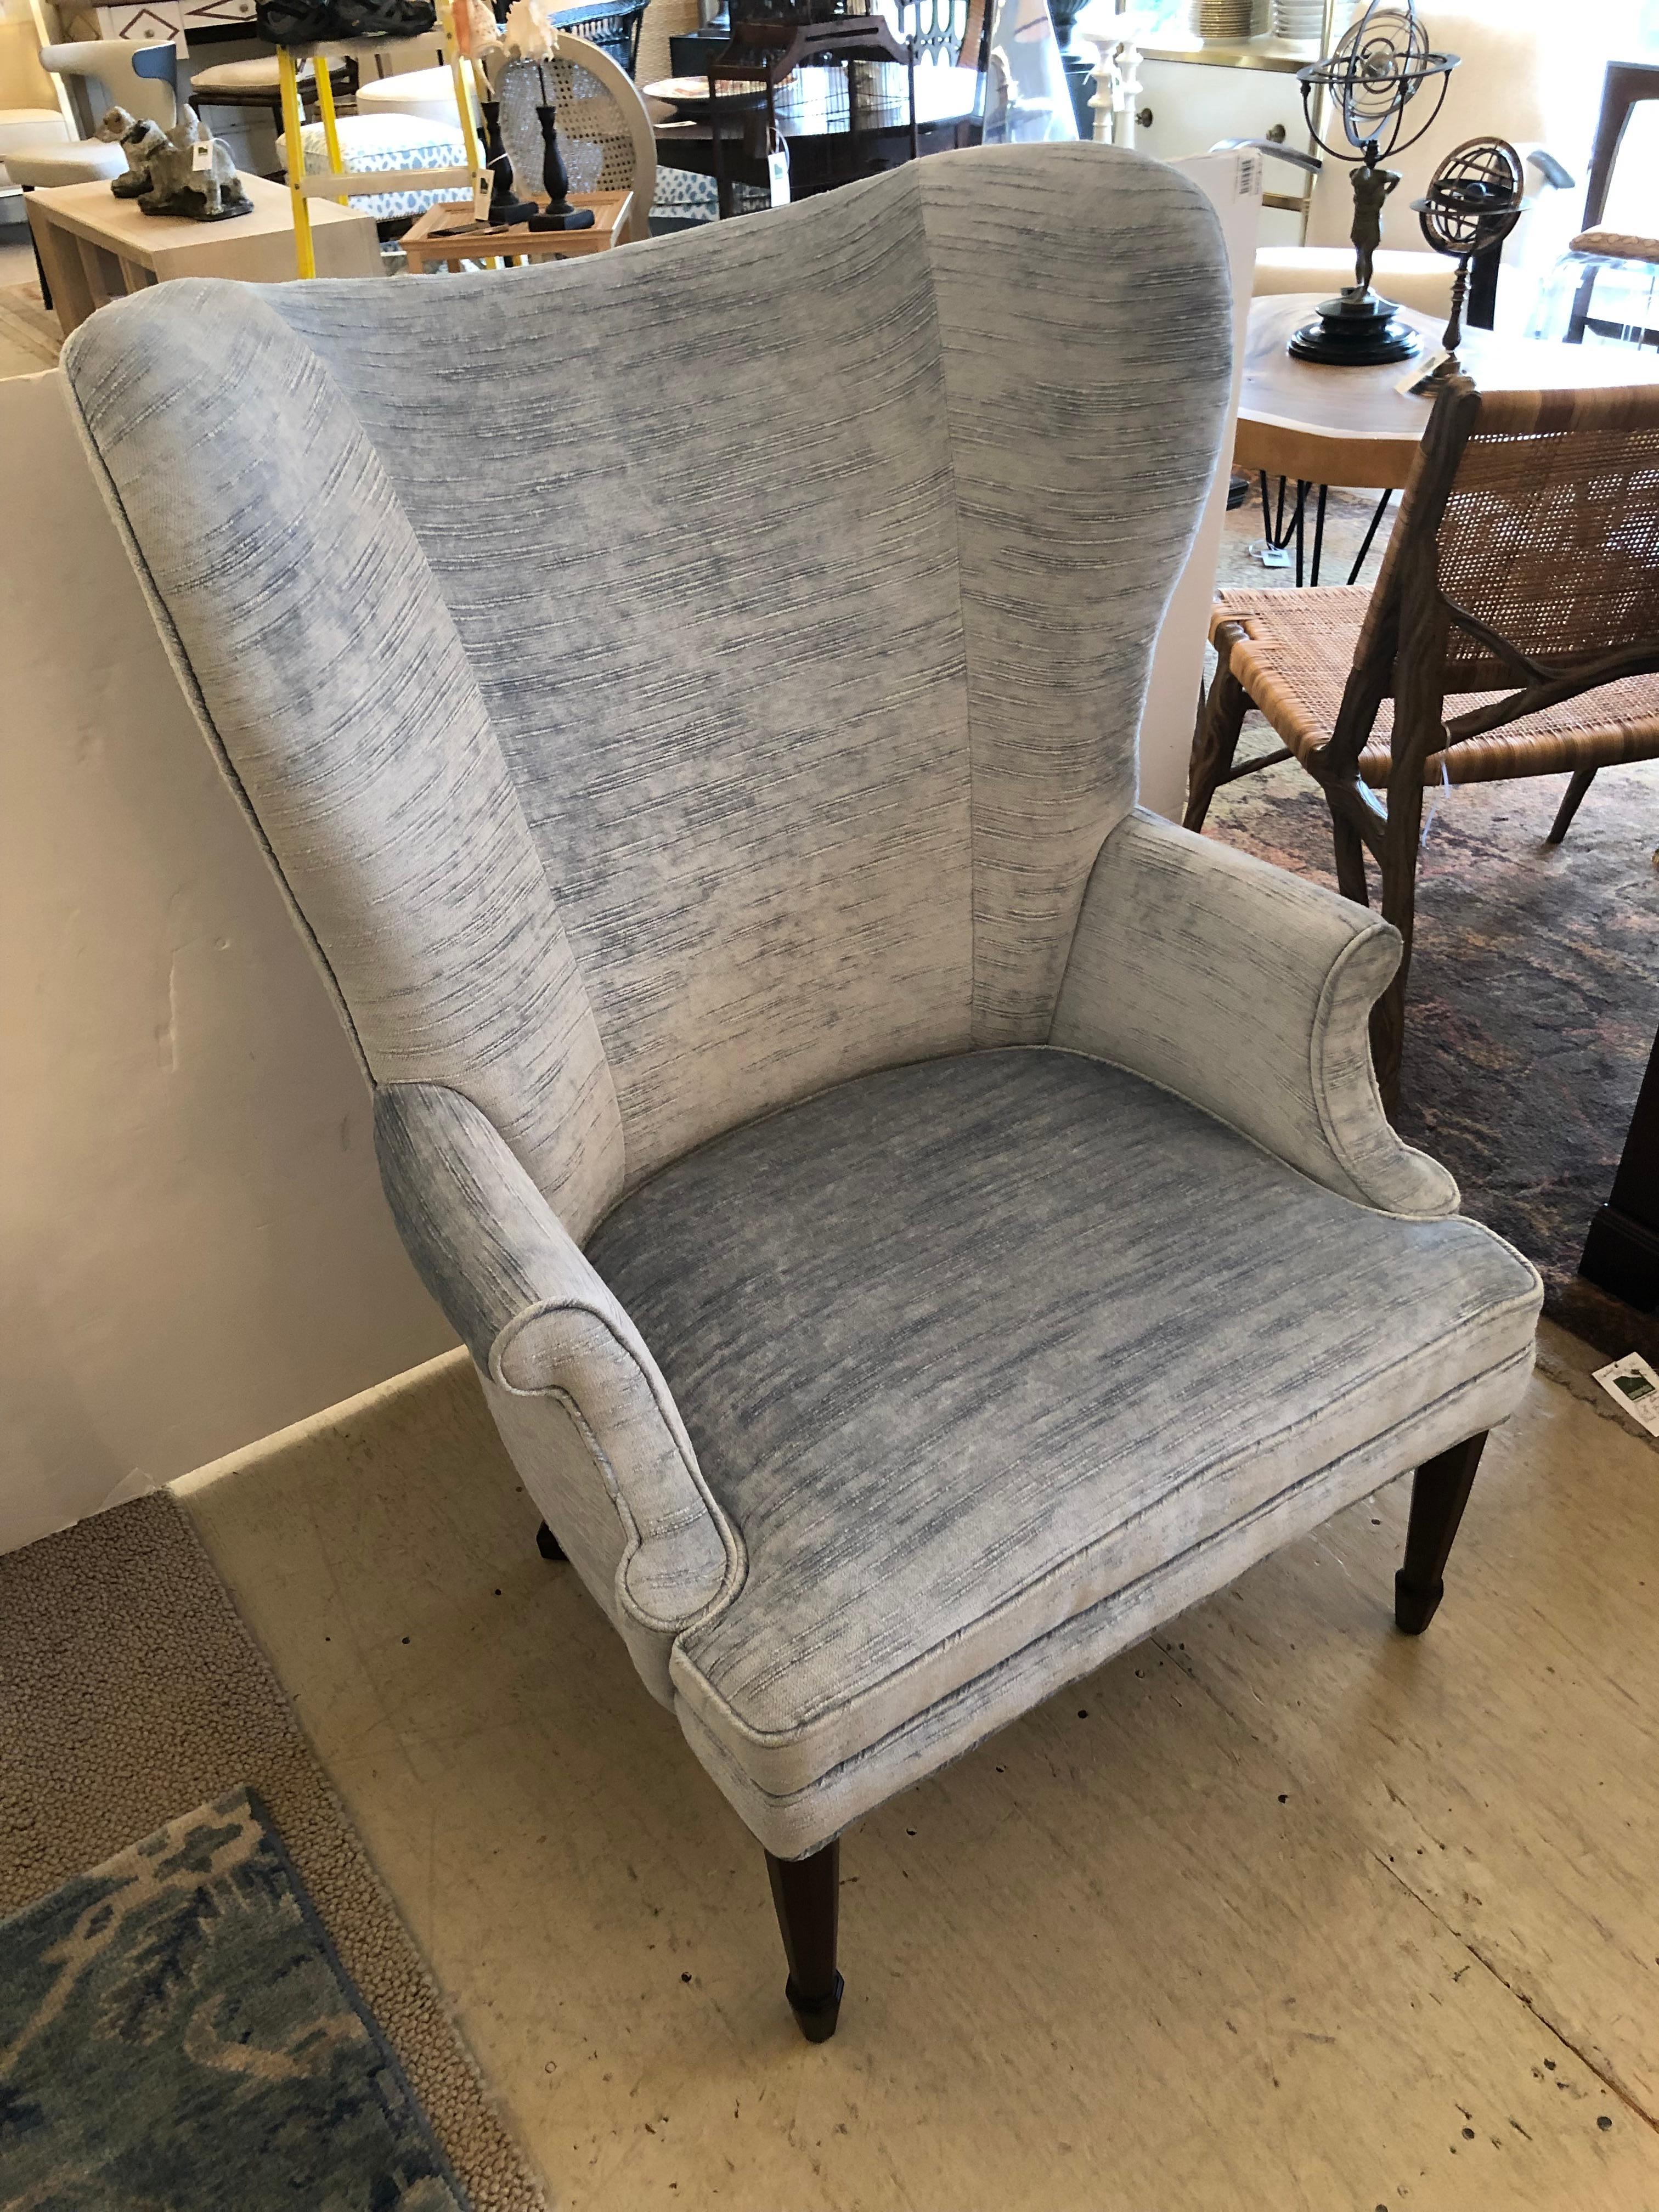 Super luxurious Century Furniture Santa Rosa wingback chair having sensuous modern silhouette and newly upholstered in a dreamy soft powder blue chenille.
arm height 23